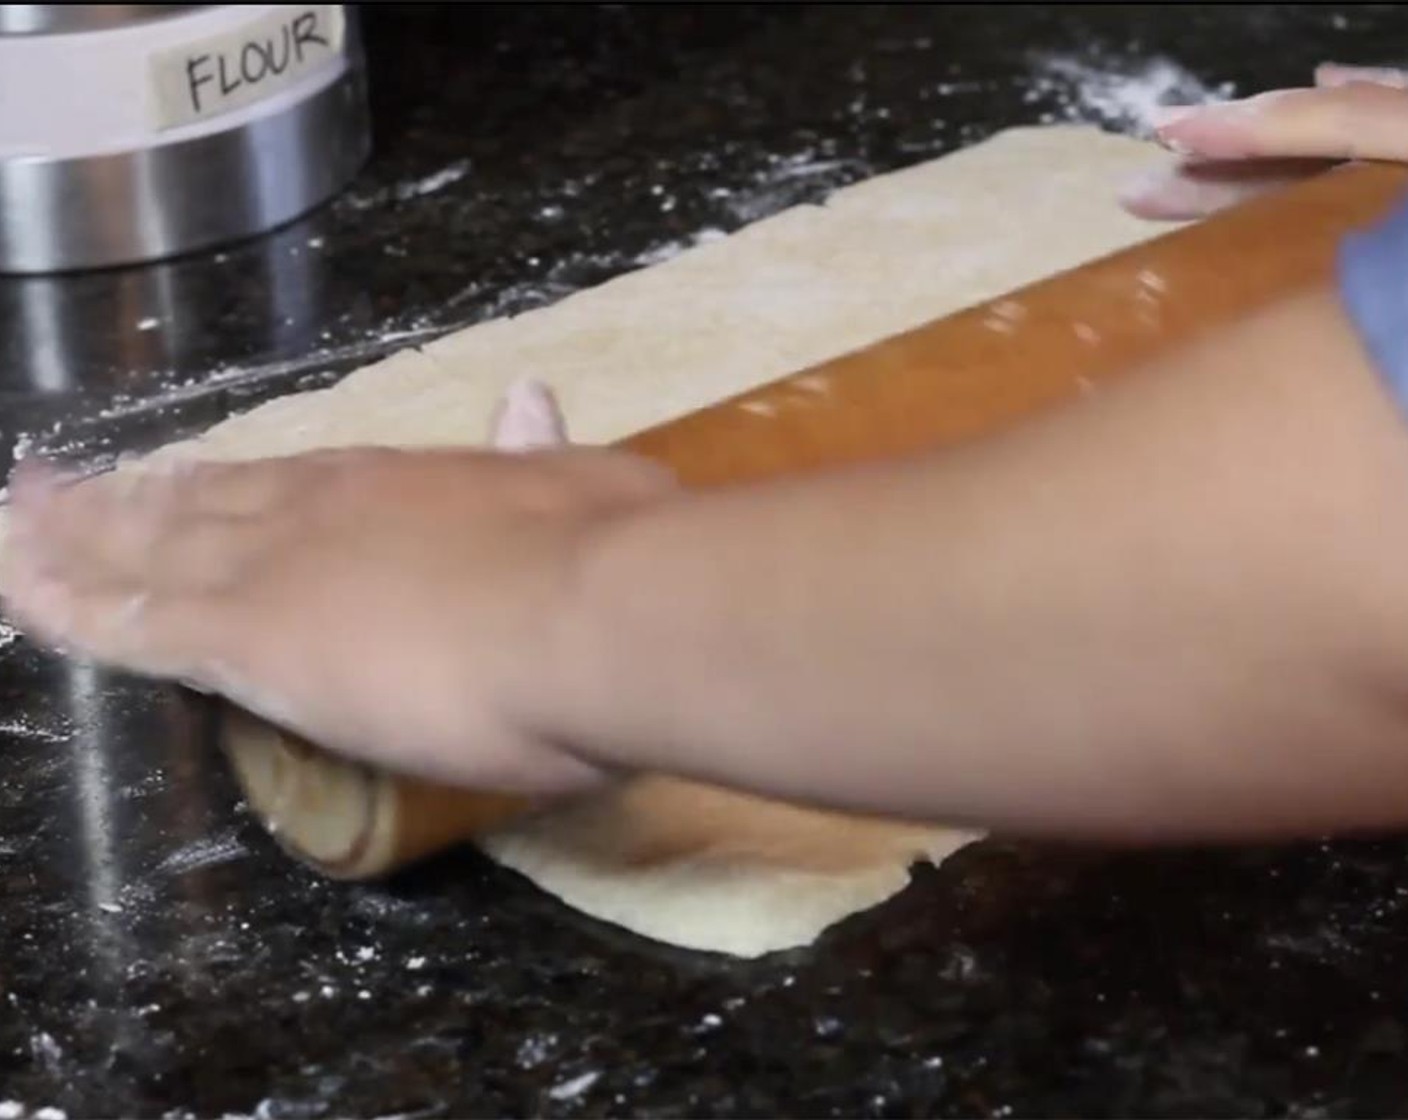 step 7 Preheat the oven to 400 degrees F (200 degrees C). Line a sheet pan with parchment paper. On a floured surface, roll the dough into a rectangular shape, as best as you can, until it is about ¼-inch thick.